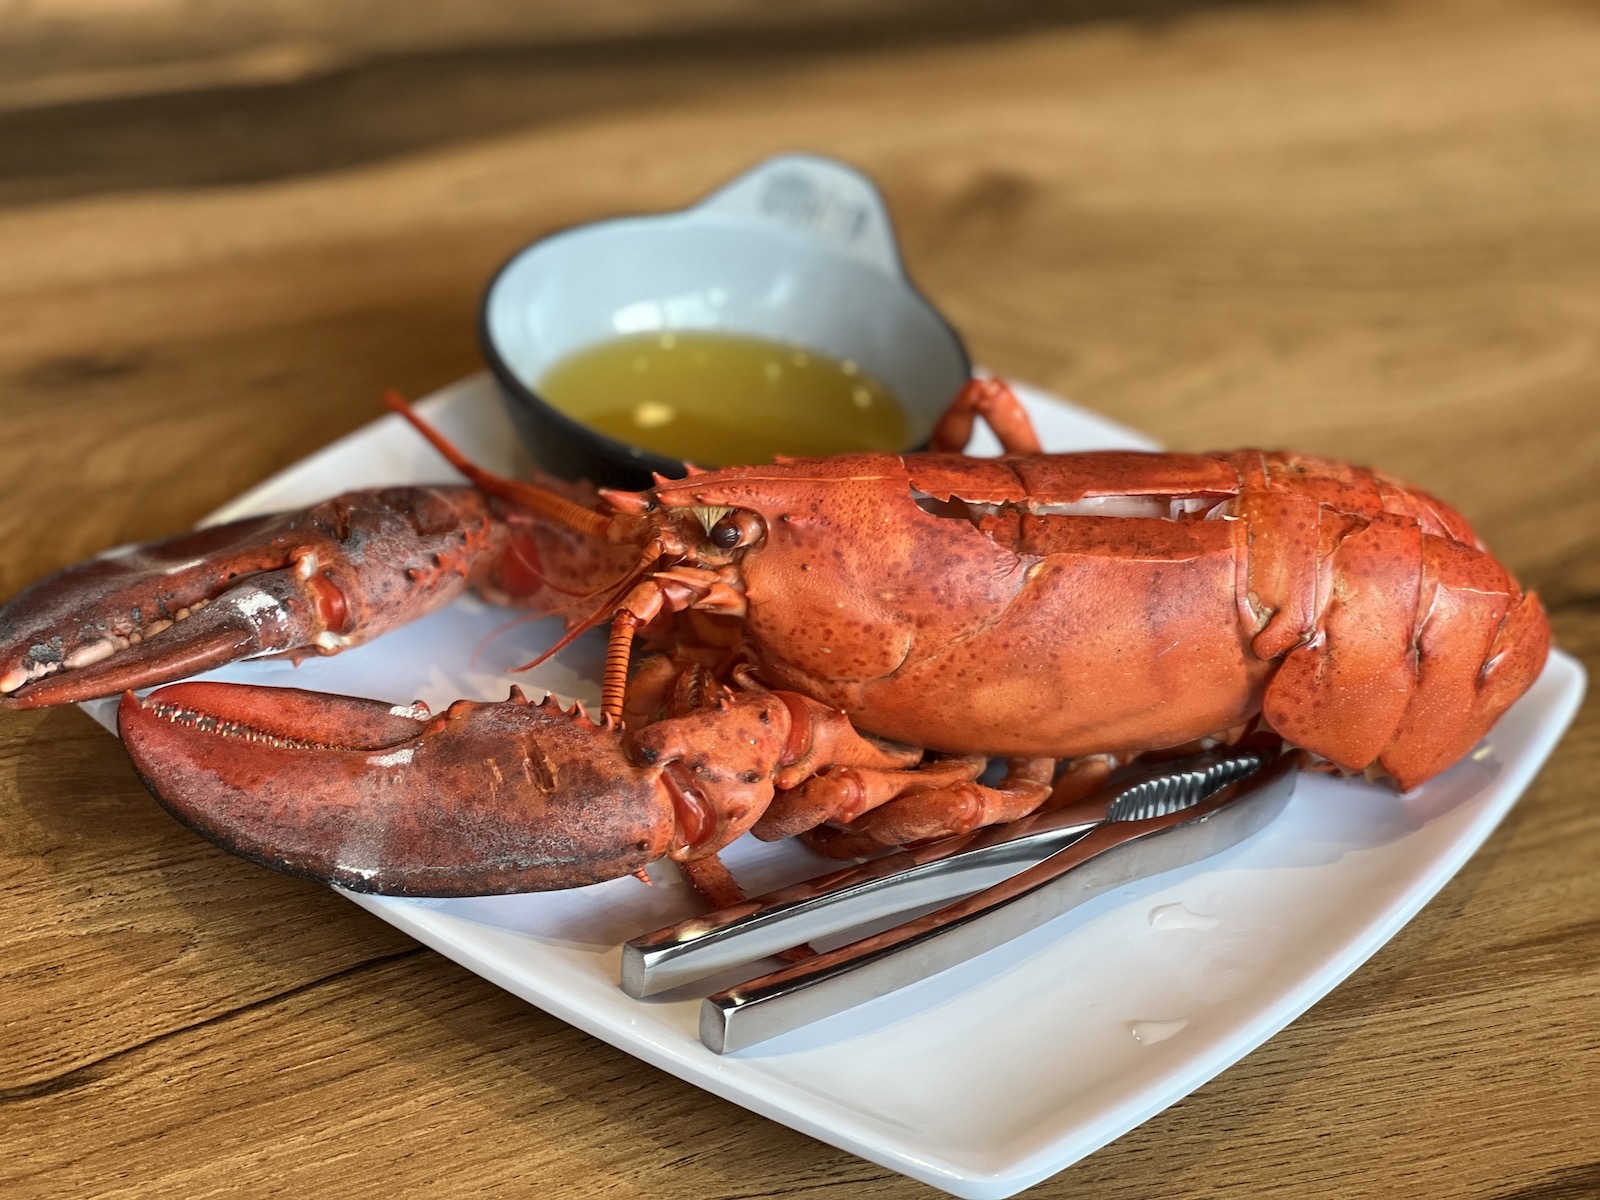 Steamed lobster with drawn butter